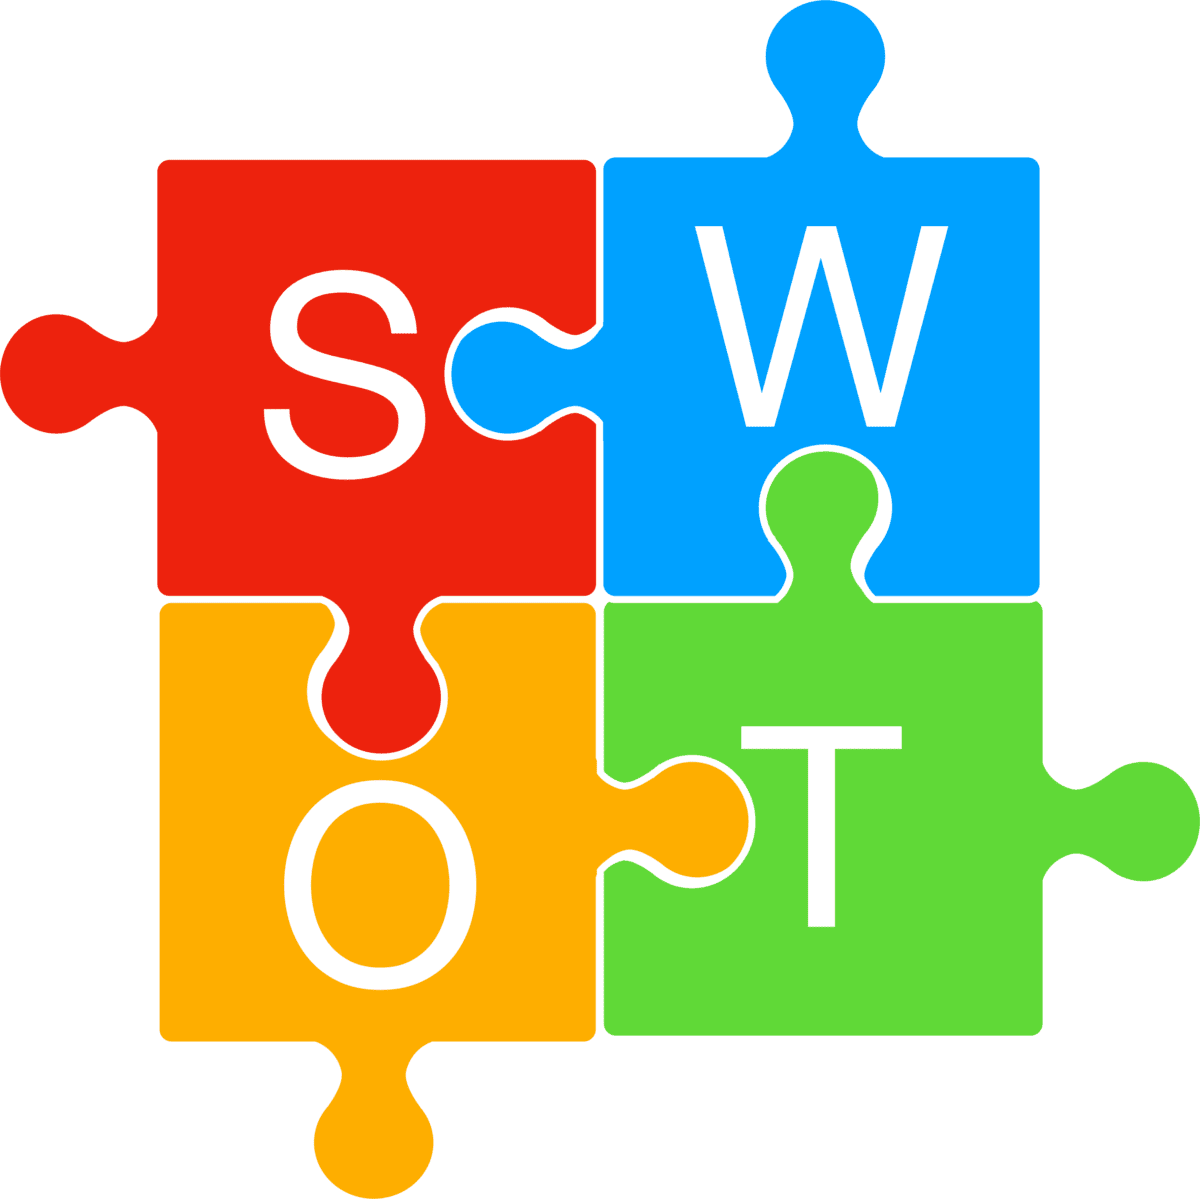 SWOT (strengths, weaknesses, opportunities, threats) - analysis